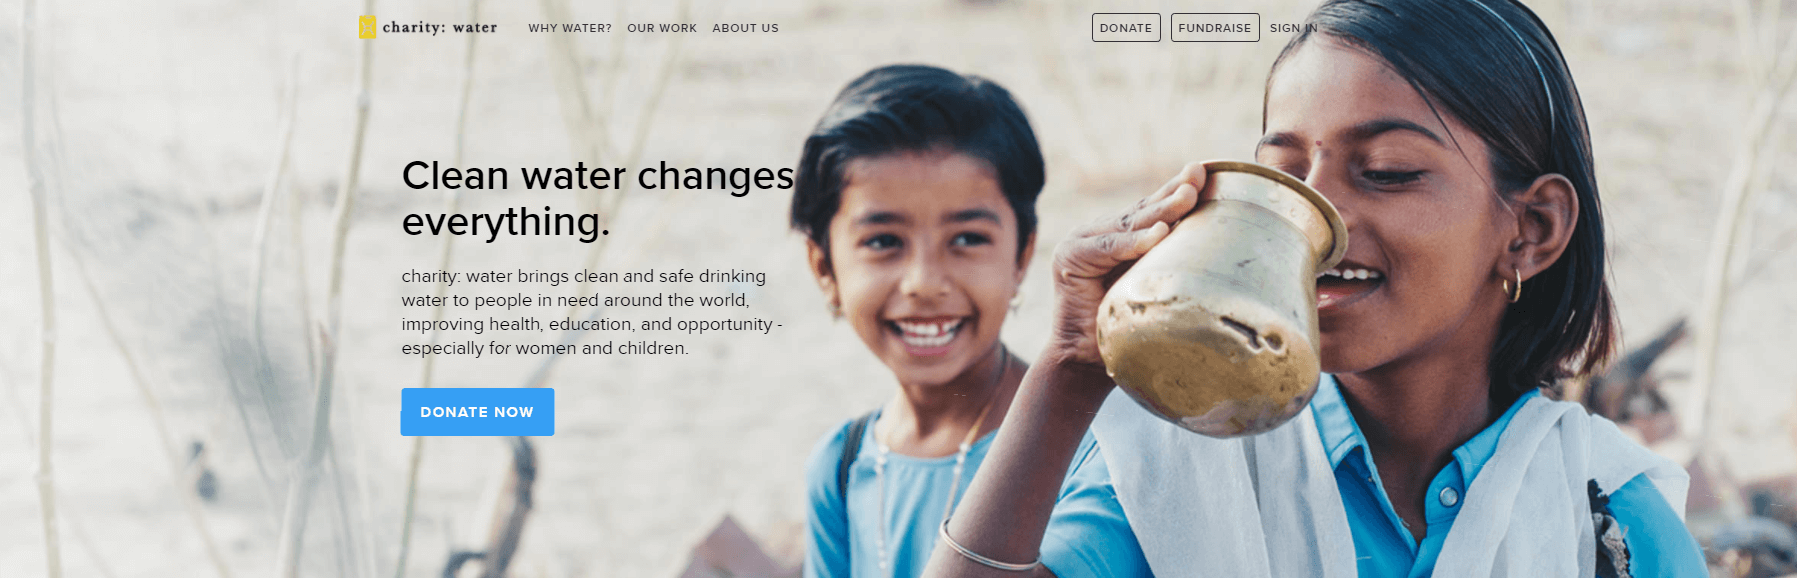 The Charity Water website.